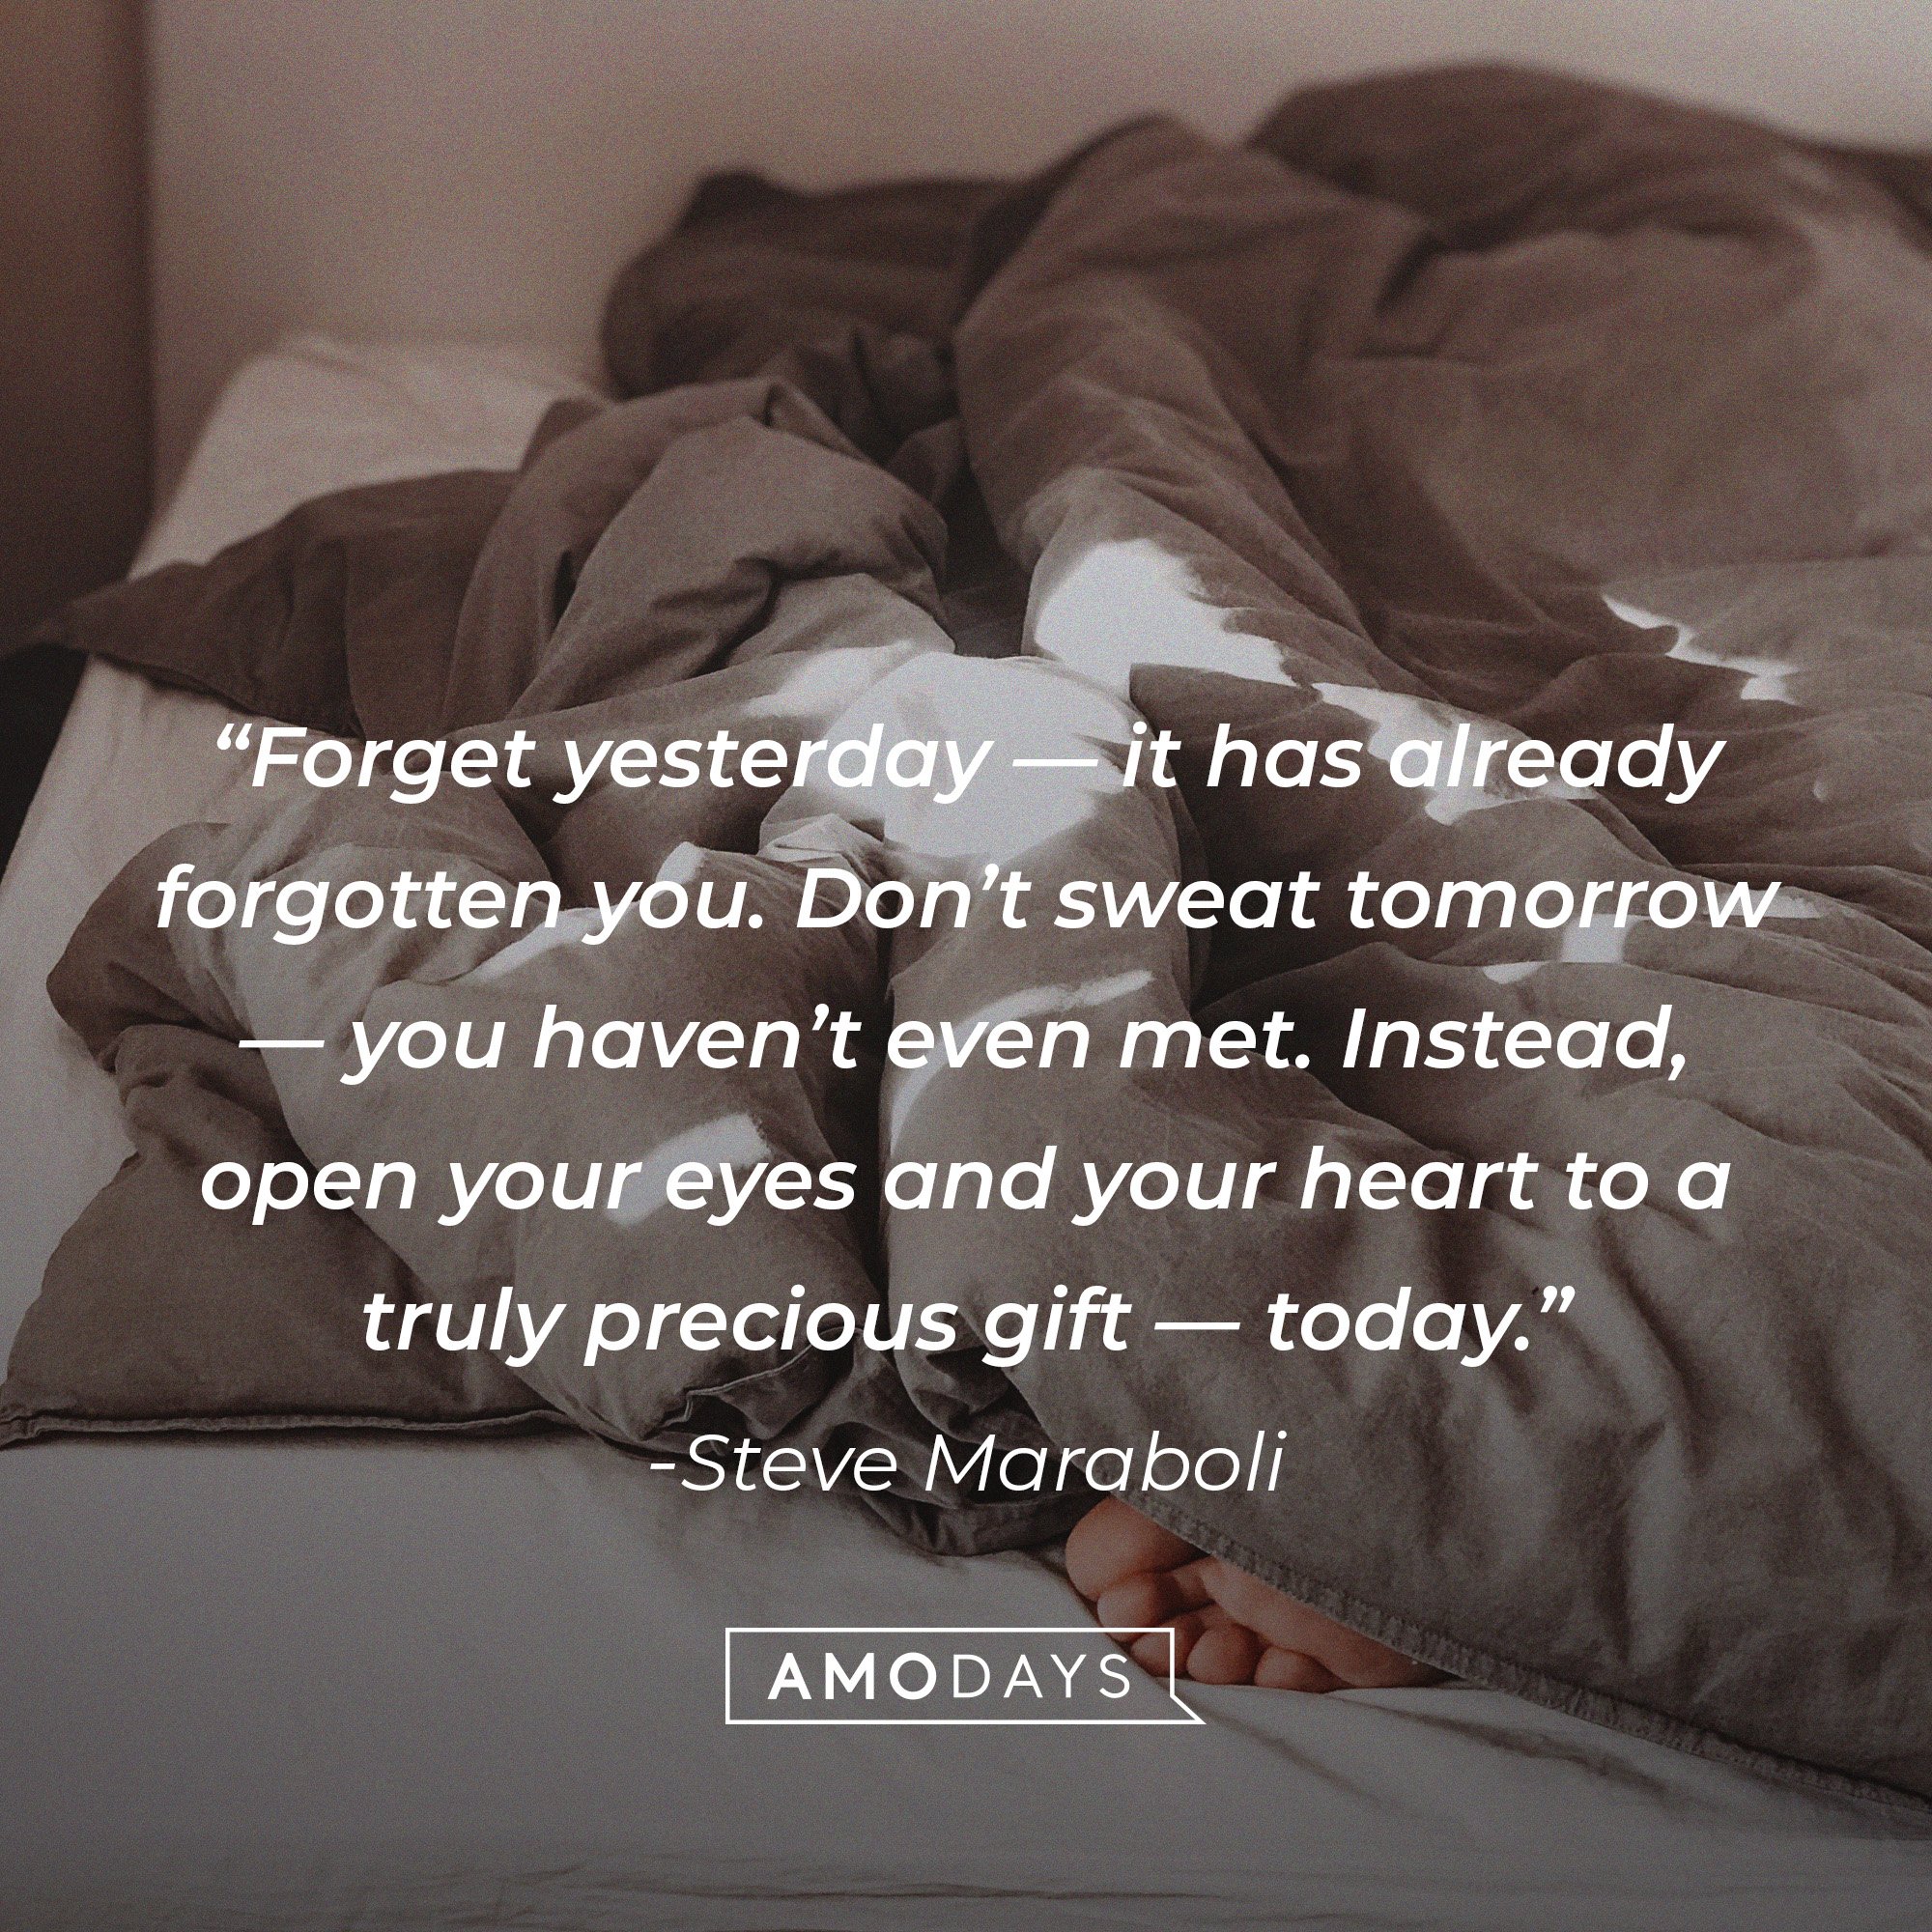 Steve Maraboli's quote: “Forget yesterday — it has already forgotten you. Don’t sweat tomorrow — you haven’t even met. Instead, open your eyes and your heart to a truly precious gift — today.” | Image: AmoDays 